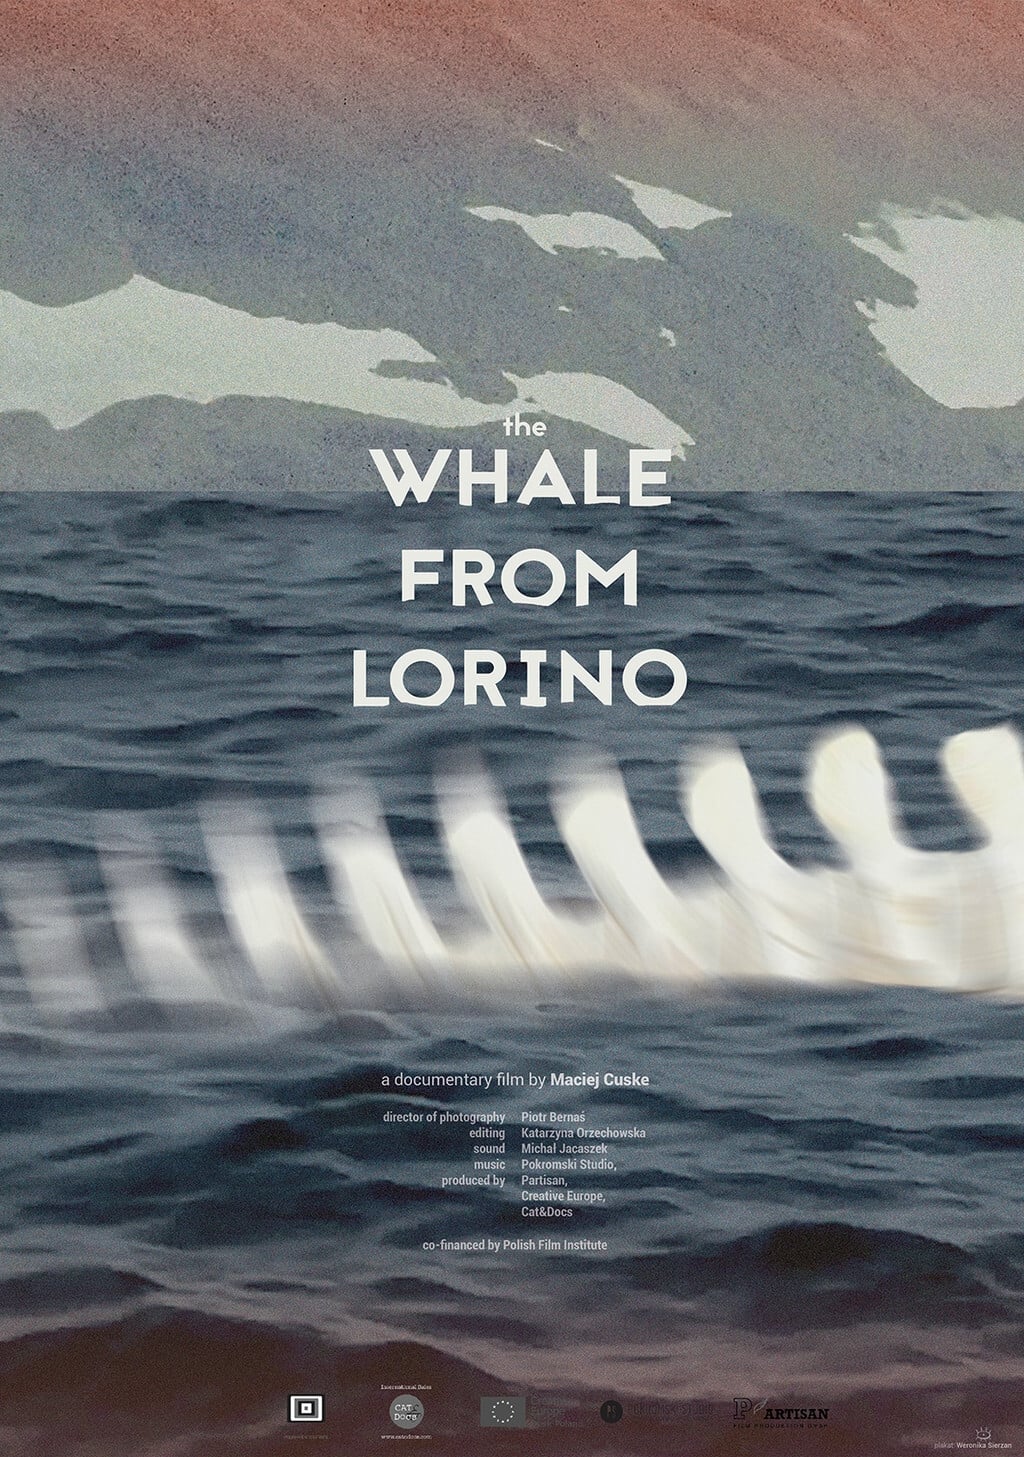 The Whale from Lorino